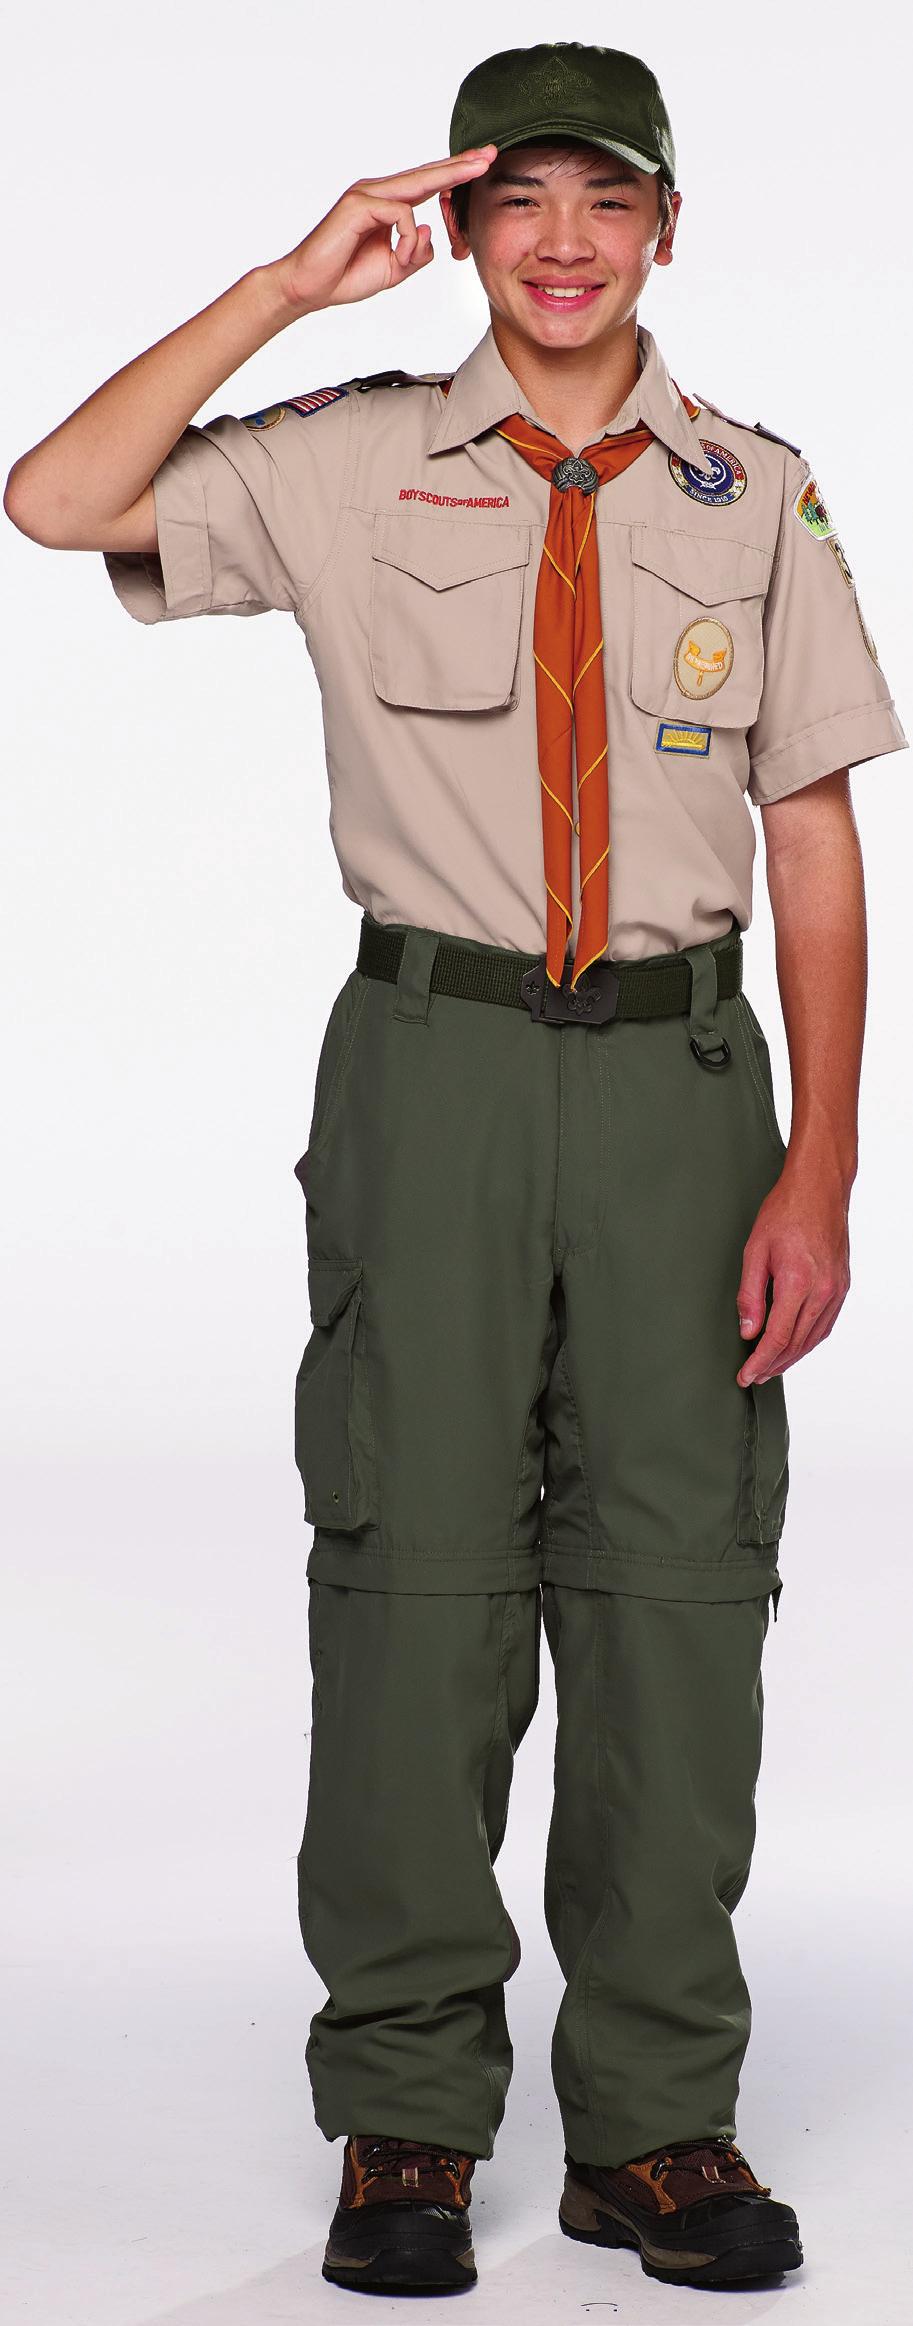 Uniform Inspection Sheet Boy Scout/Varsity Conduct the uniform inspection with common sense; the basic rule is neatness.